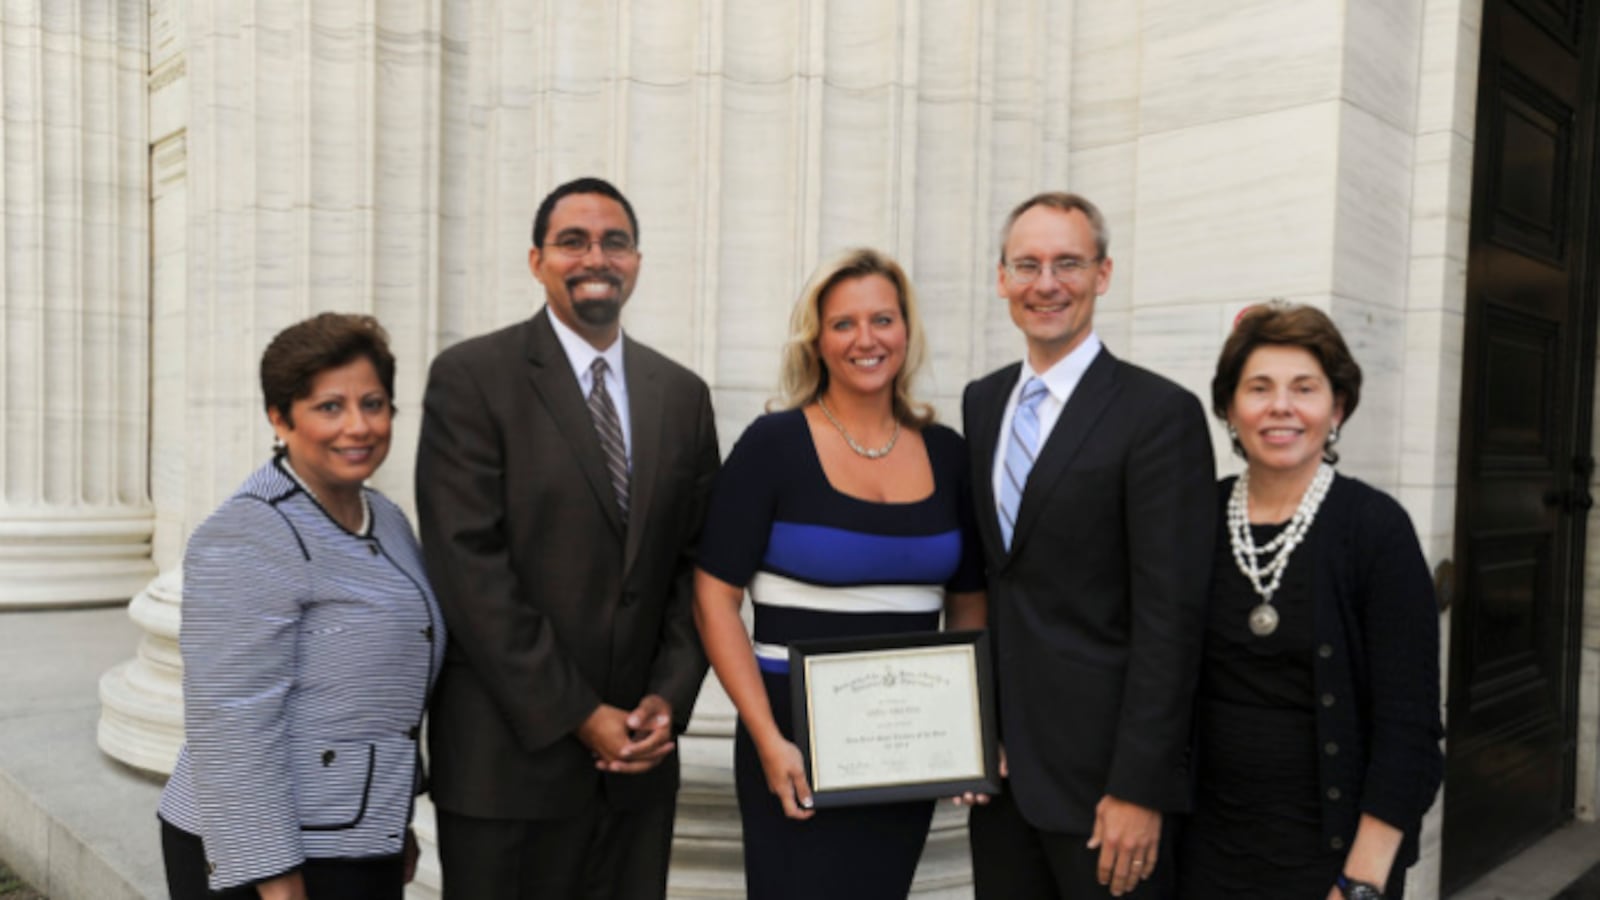 Ashli Skura Dreher, middle, is recognized in 2013 as New York State's Teacher of the Year. She is defending tenure in a lawsuit challenging the state's job protection laws.